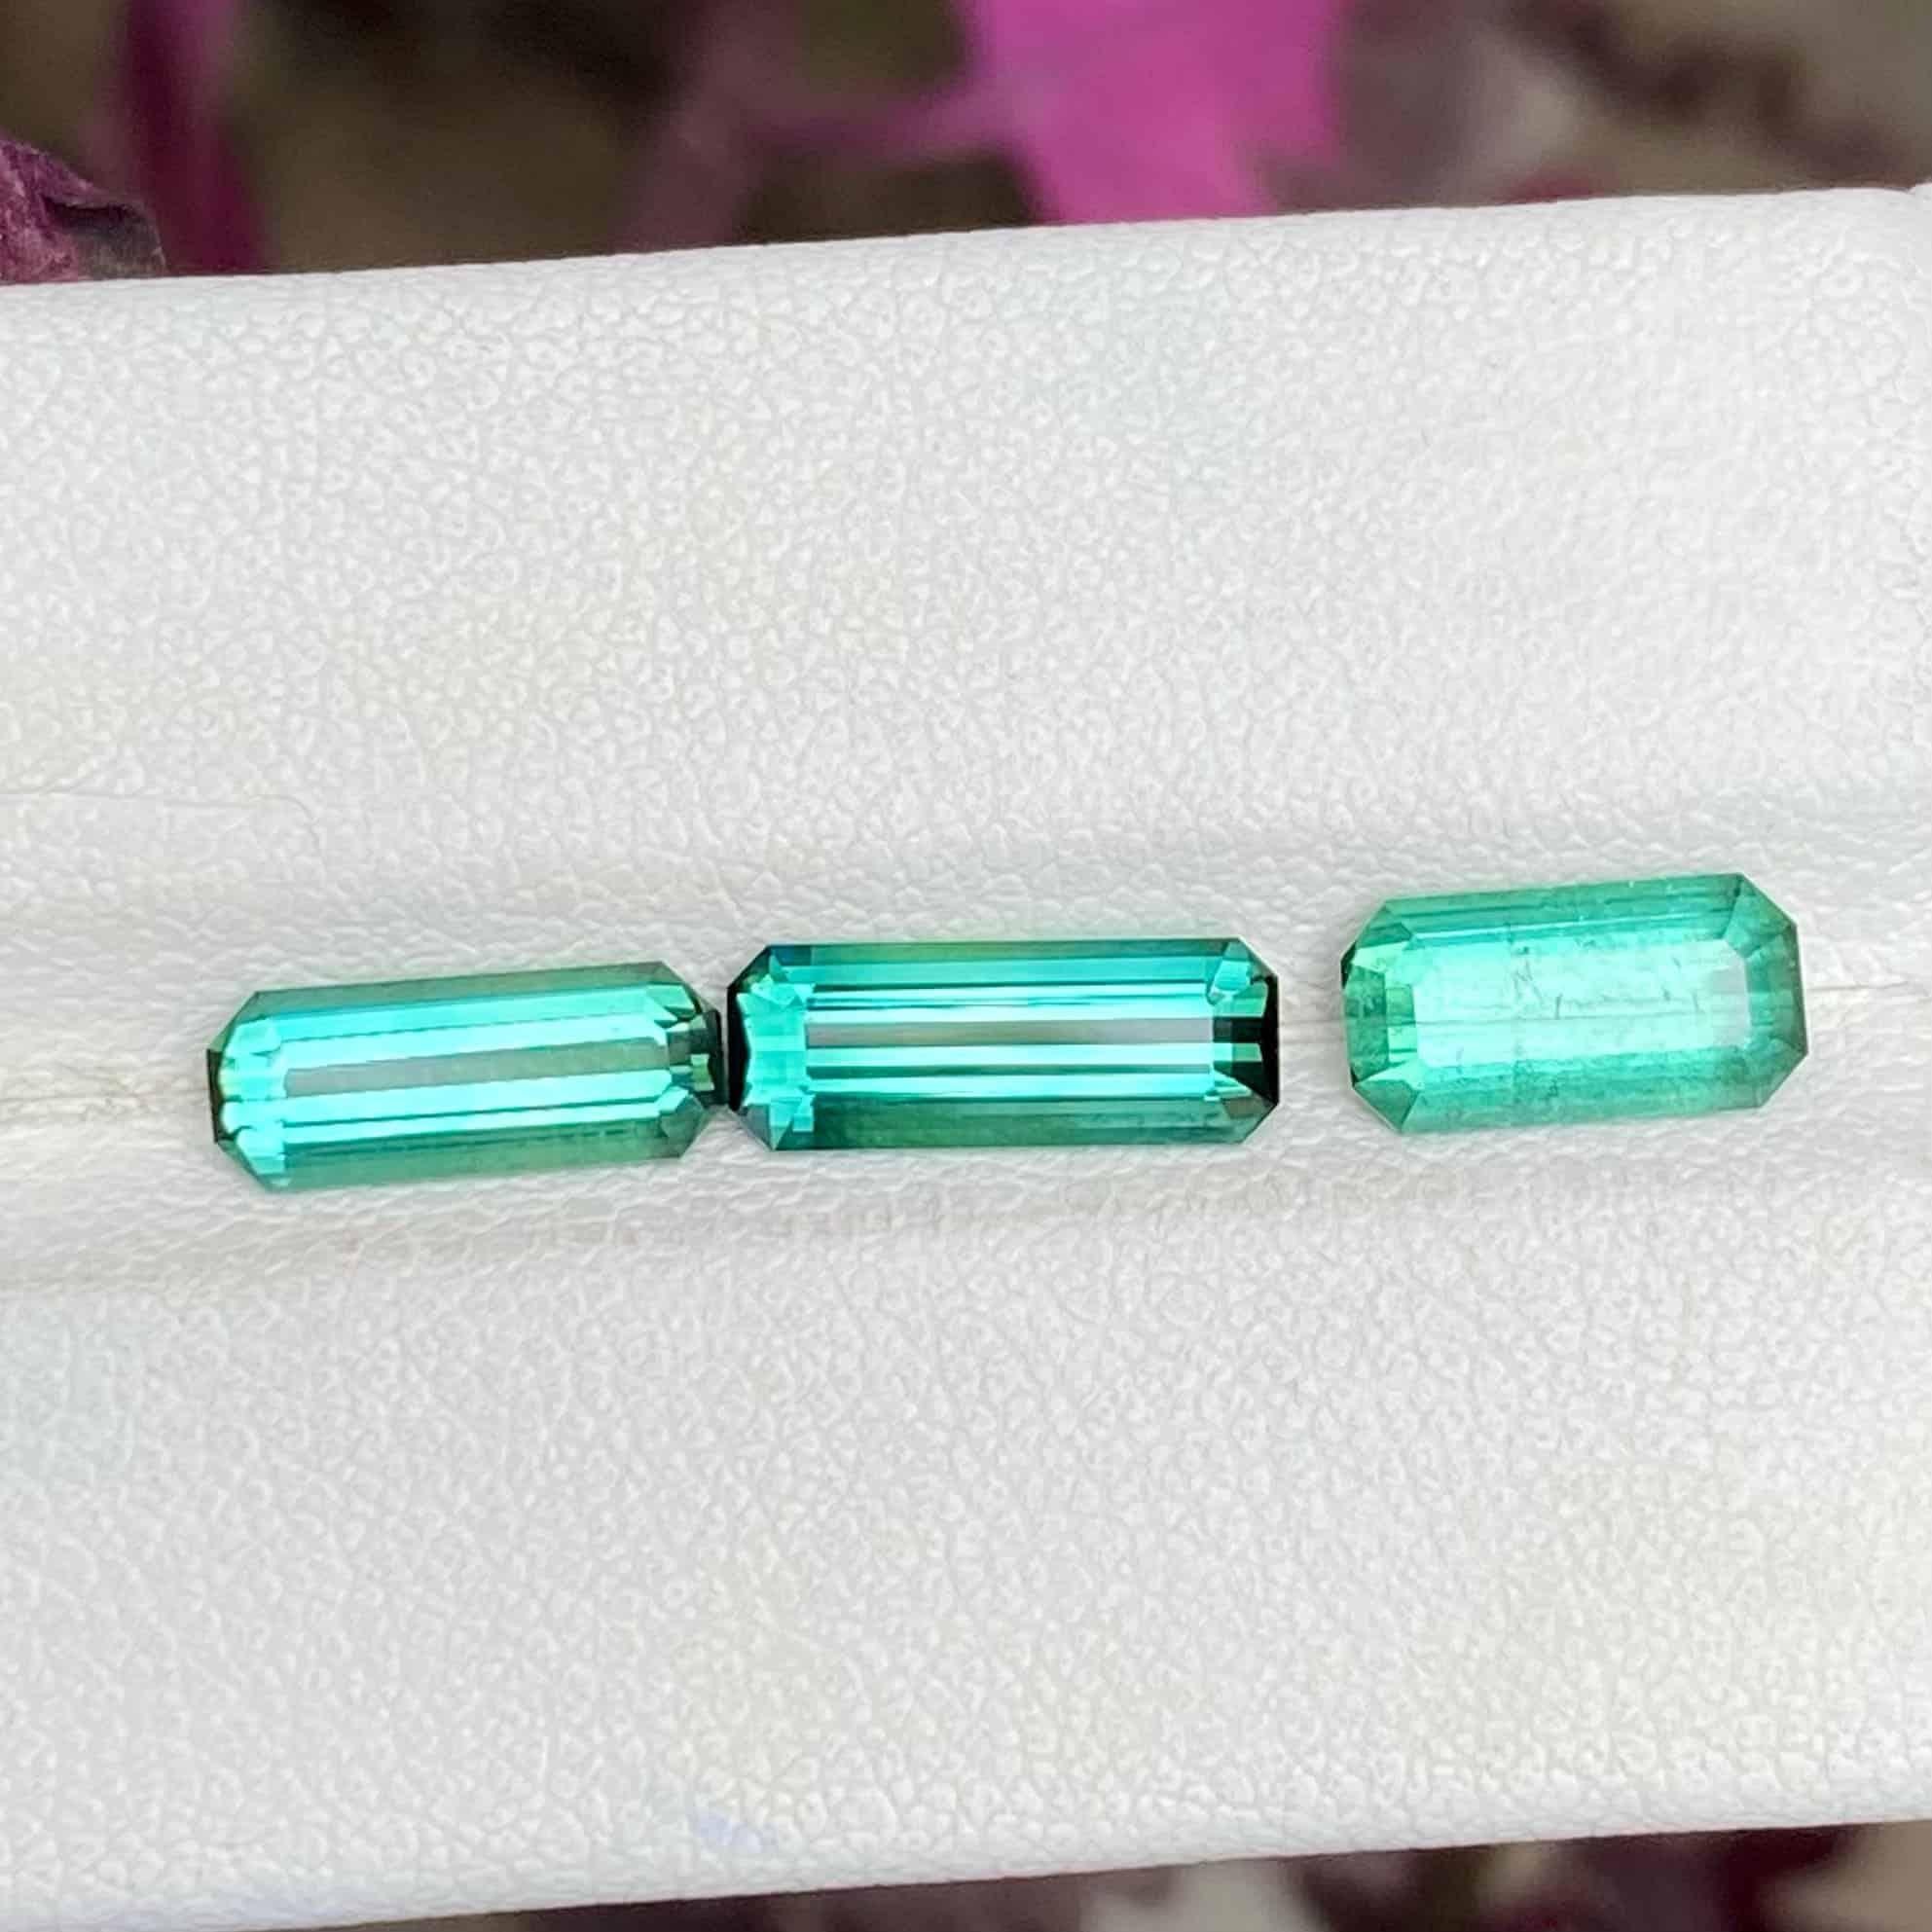 Modern 3.85 Carats Greenish Blue Tourmaline Lot Natural Gemstones From Afghanistan For Sale